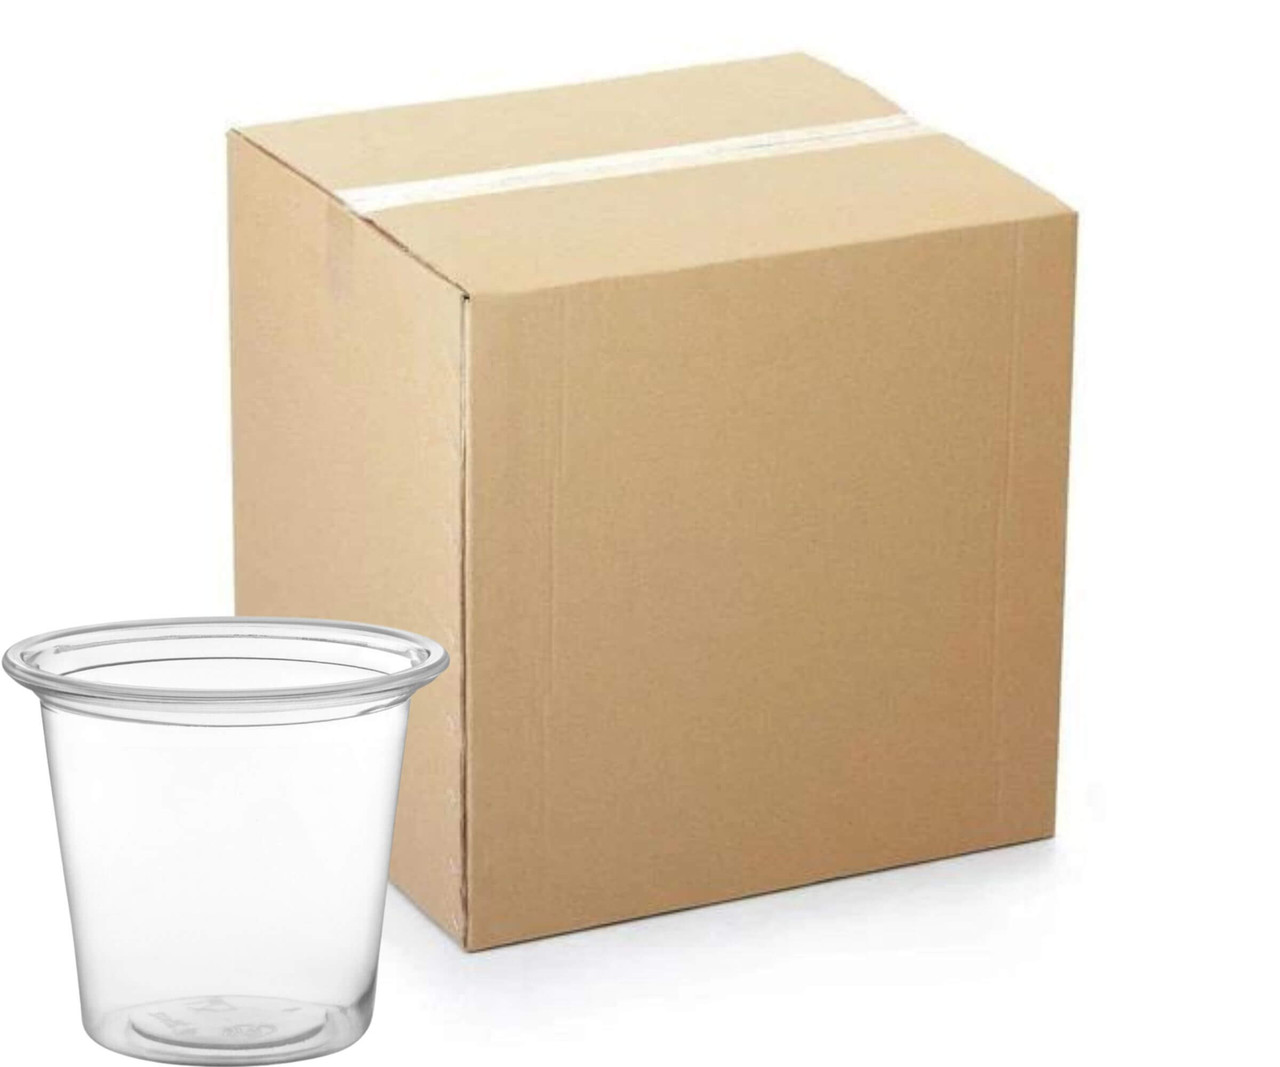 CP 1.25 oz. Clear Plastic Shot Glass - 5000/Case | Cheers to Shots in Bulk with Convenient Disposable Glasses-Chicken Pieces